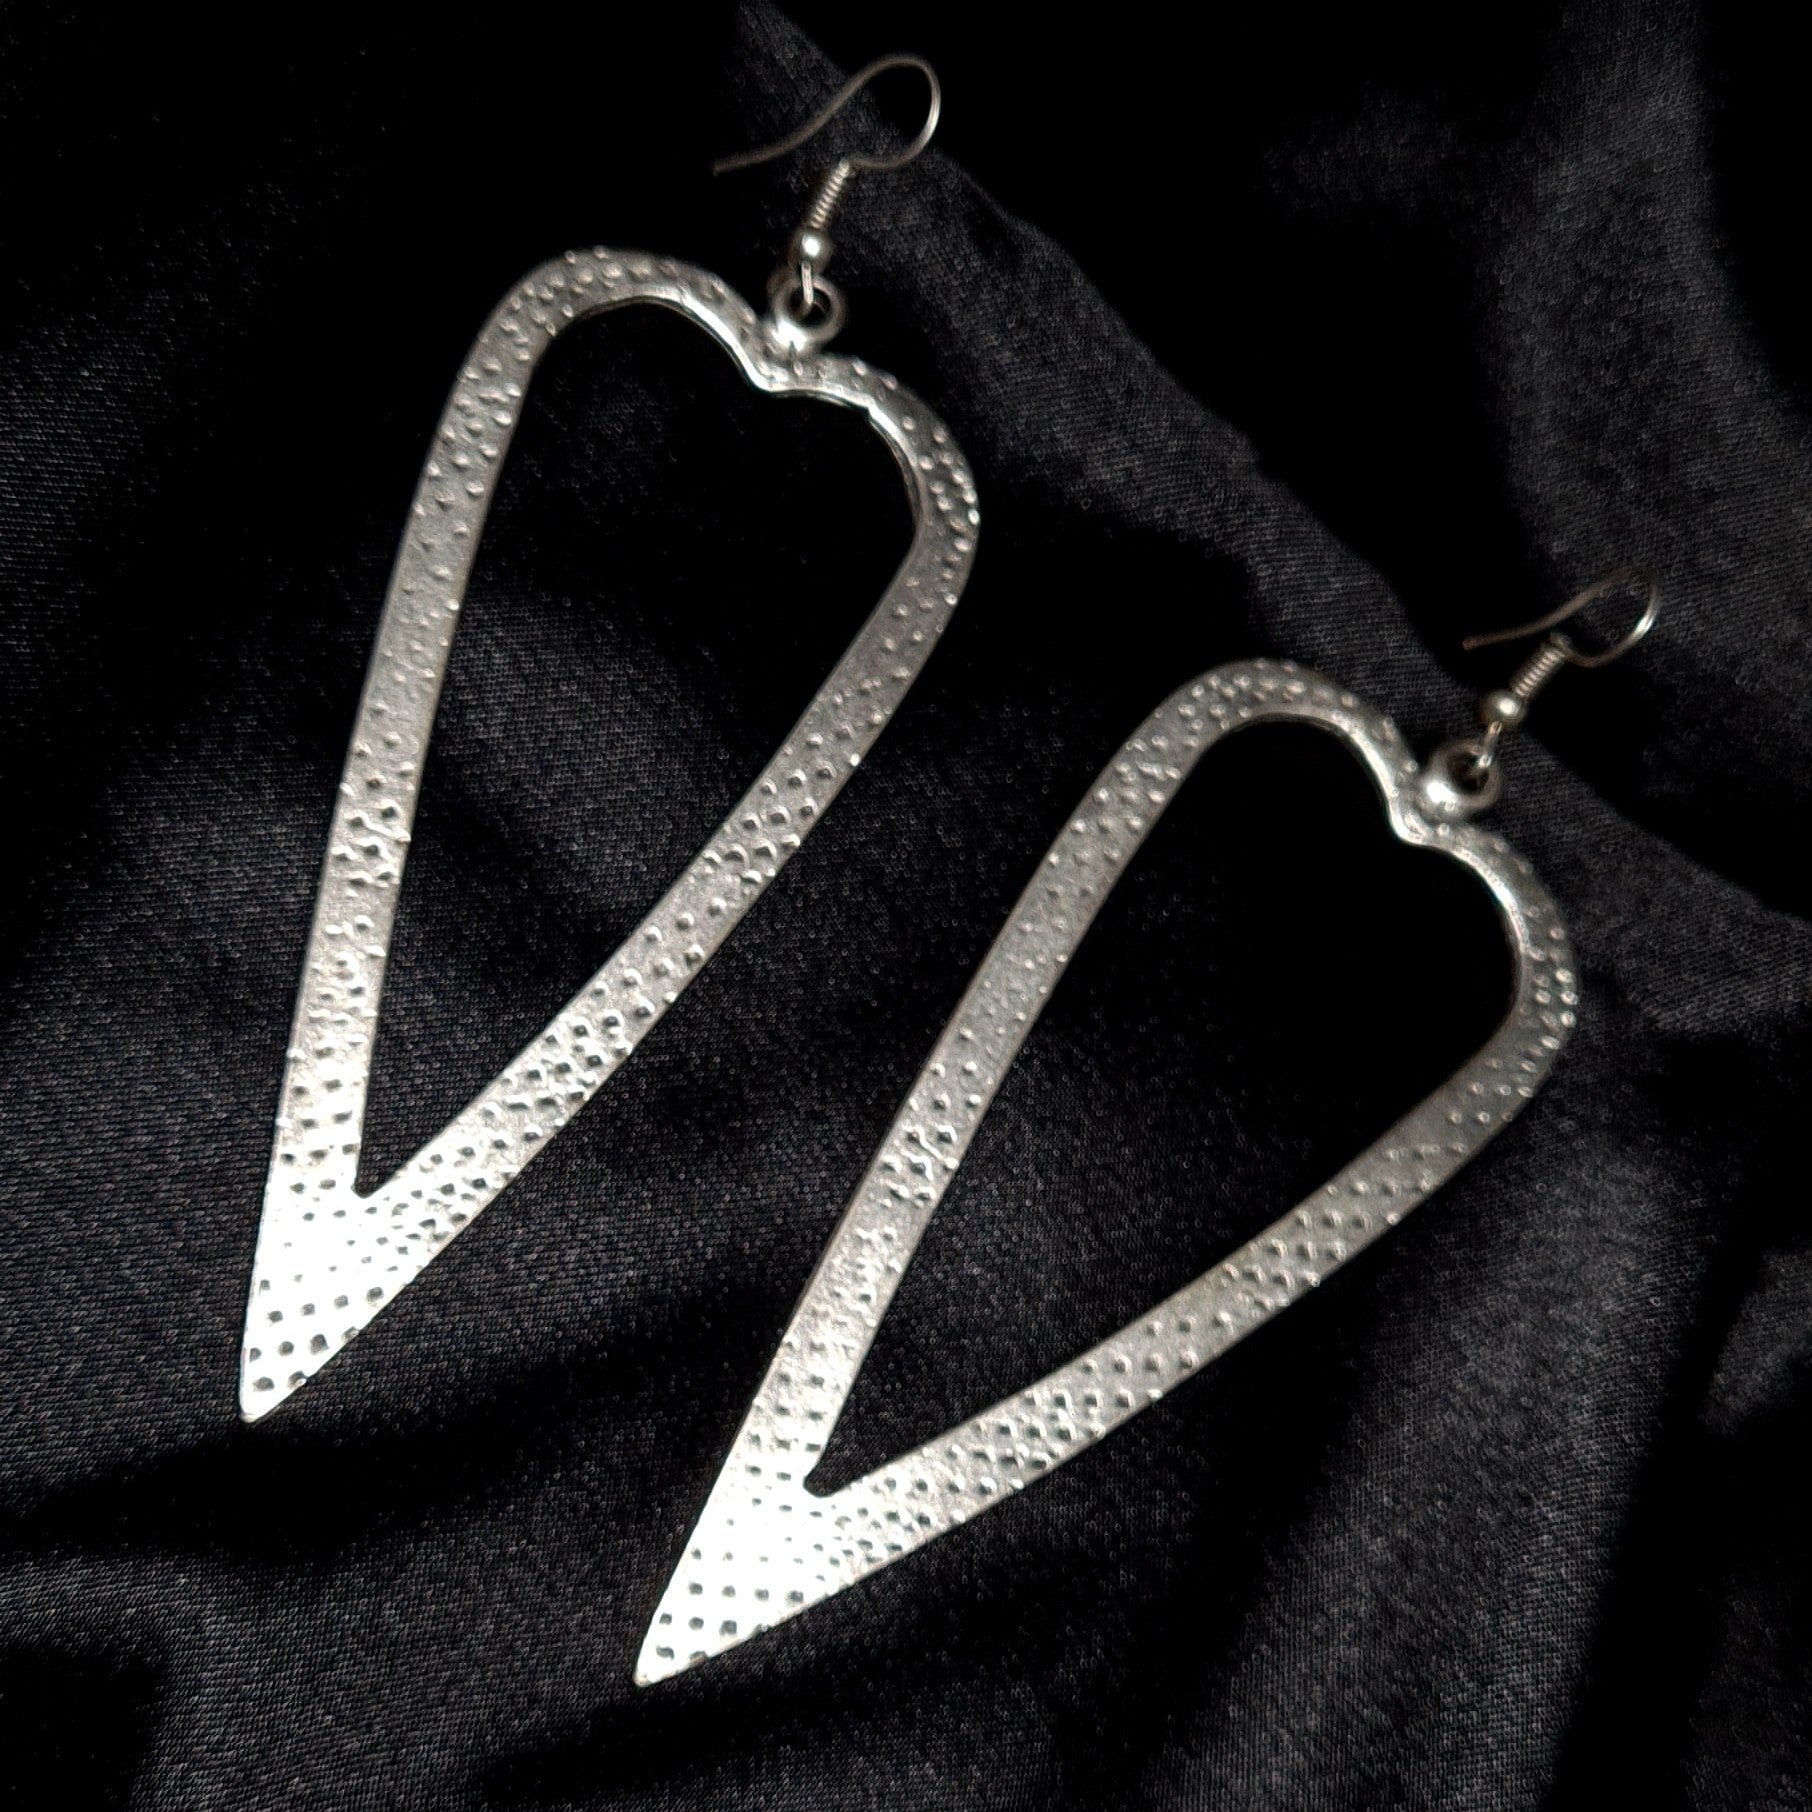 A pair of silver earrings in the shape of a heart on a black background. The earrings are small and delicate, and they have a shiny finish. The heart is smooth and has a rounded shape.